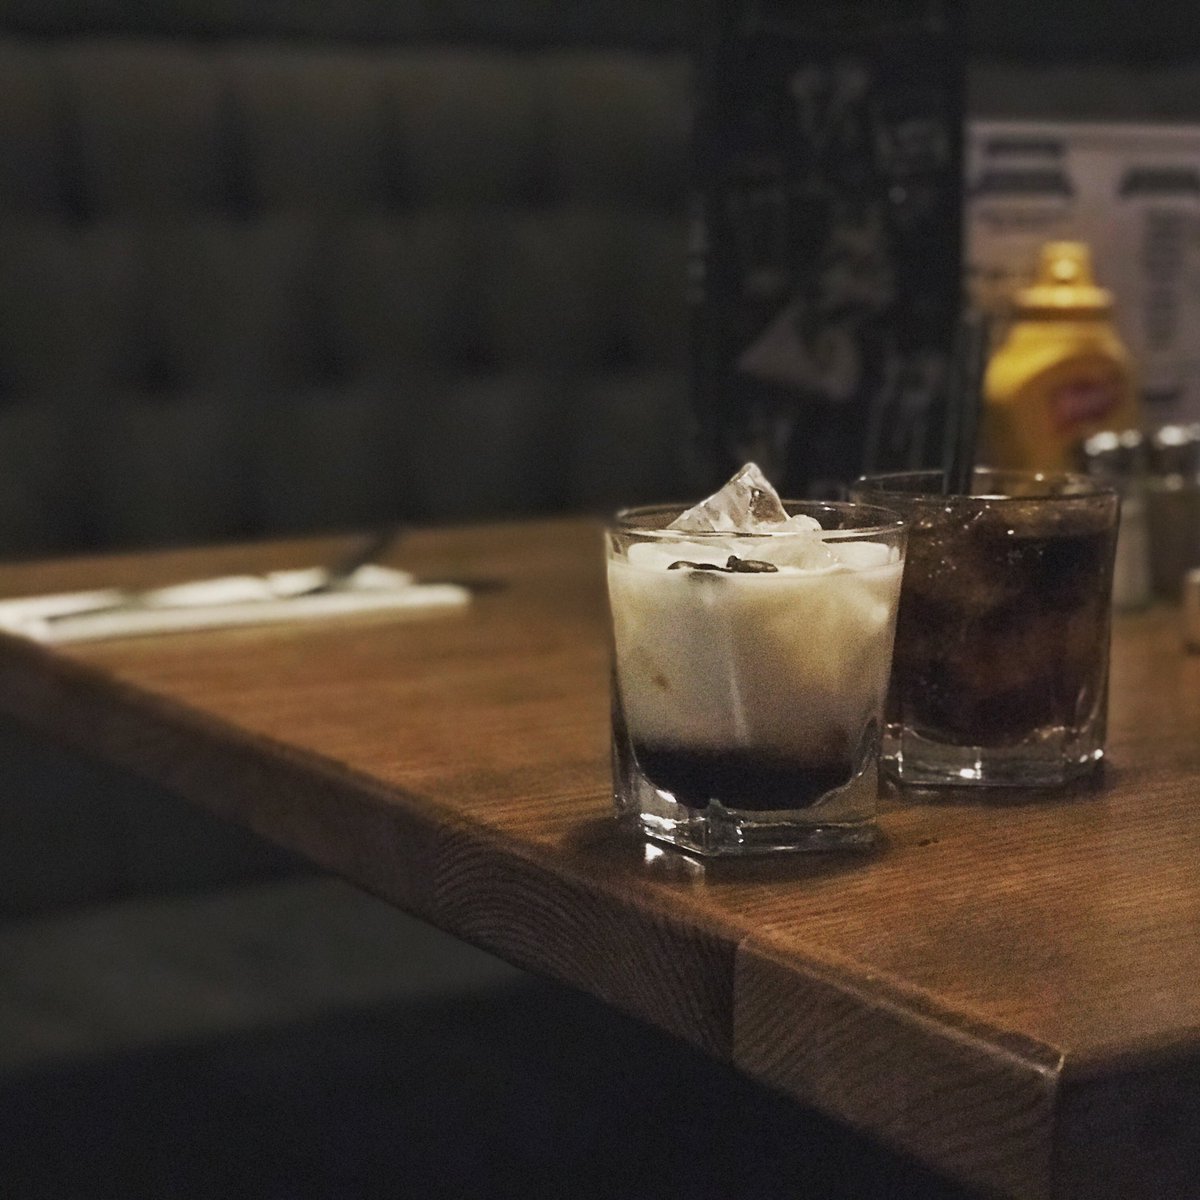 It’s been a long week! We will be closed from 3pm today and tomorrow Back to normal this weekend & we’re doing a bunch of cracking offers ALL WEEKEND!🙌 Thurs - Sat, (ALL DAY!!) we’re doing 241 cocktails, £10 wine, 2 for £6 gin & tonics, £3 pint, and £15 bottles of Prosecco!😲